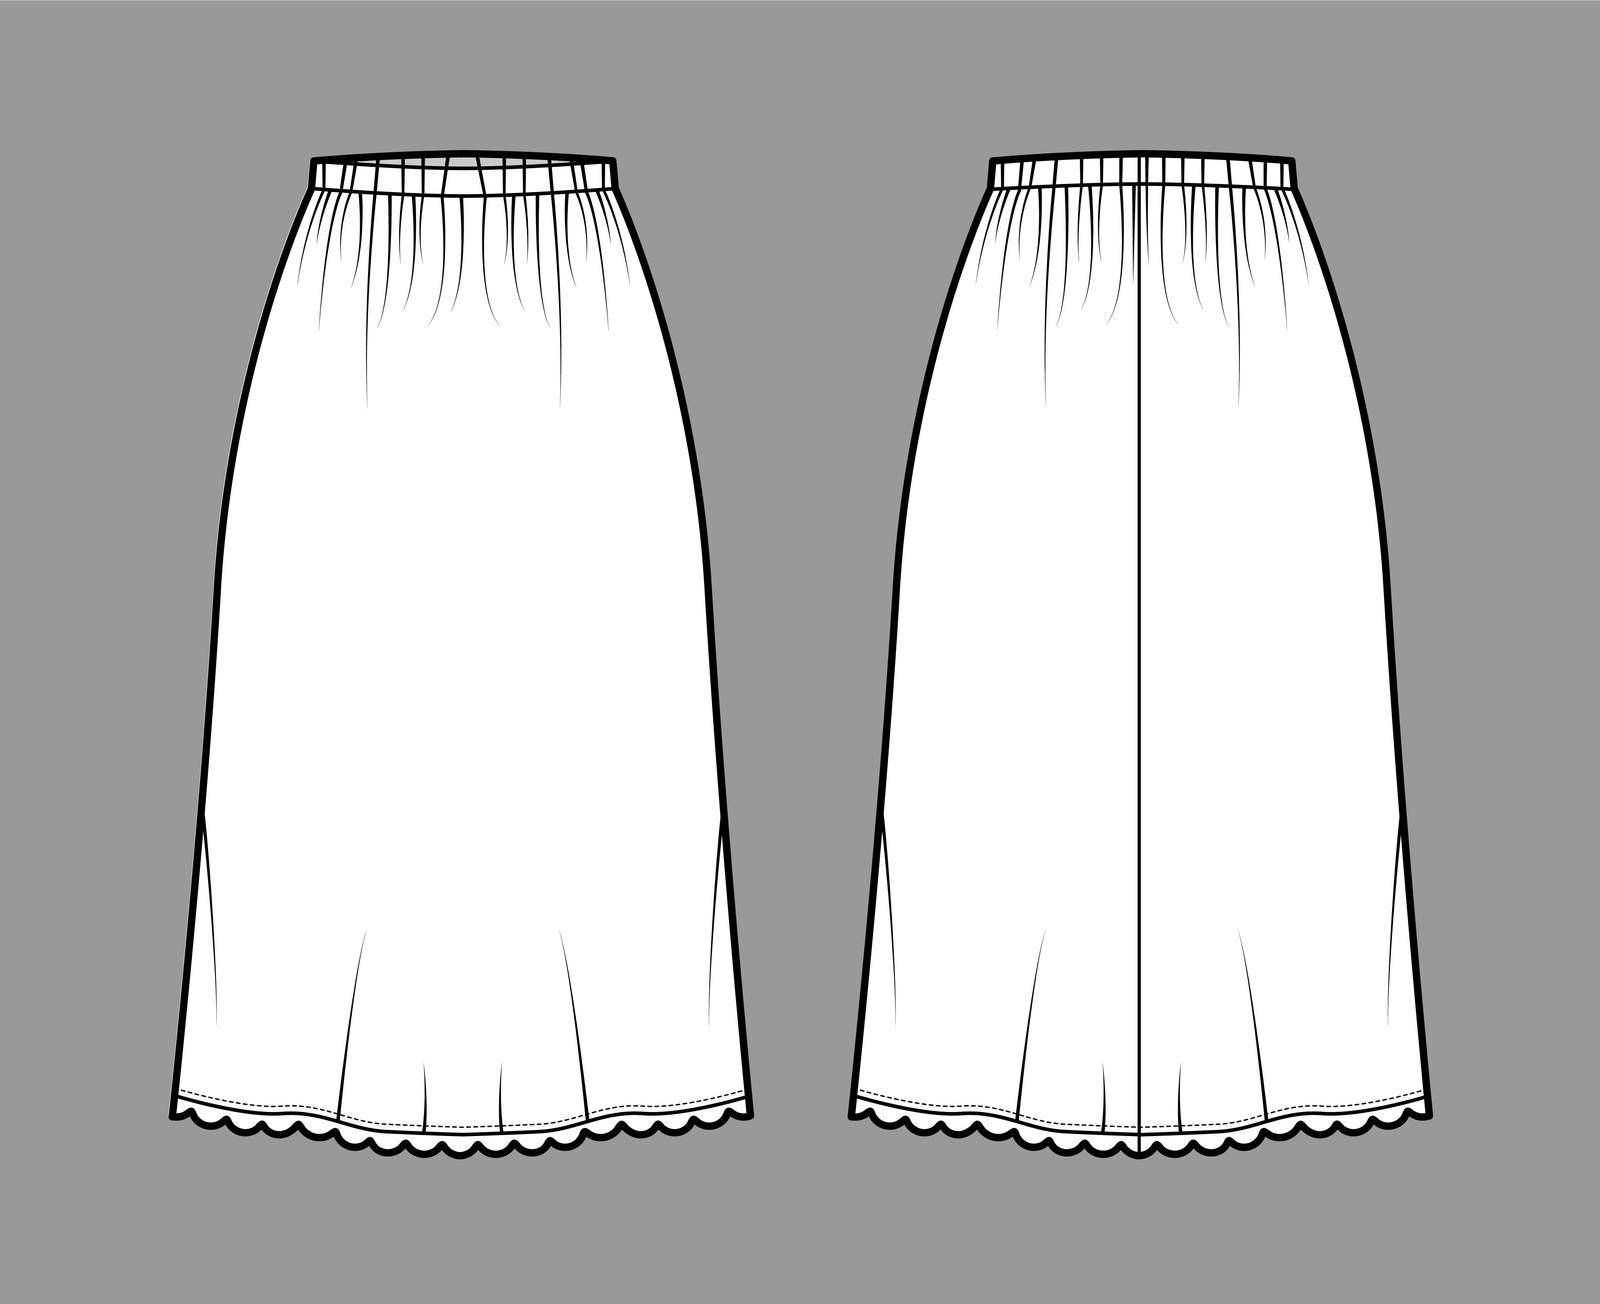 Skirt slip dirndl technical fashion illustration with below-the-knee silhouette, A-line fullness, scalloped edge. Flat bottom template front, back white color style. Women, men, unisex CAD mockup